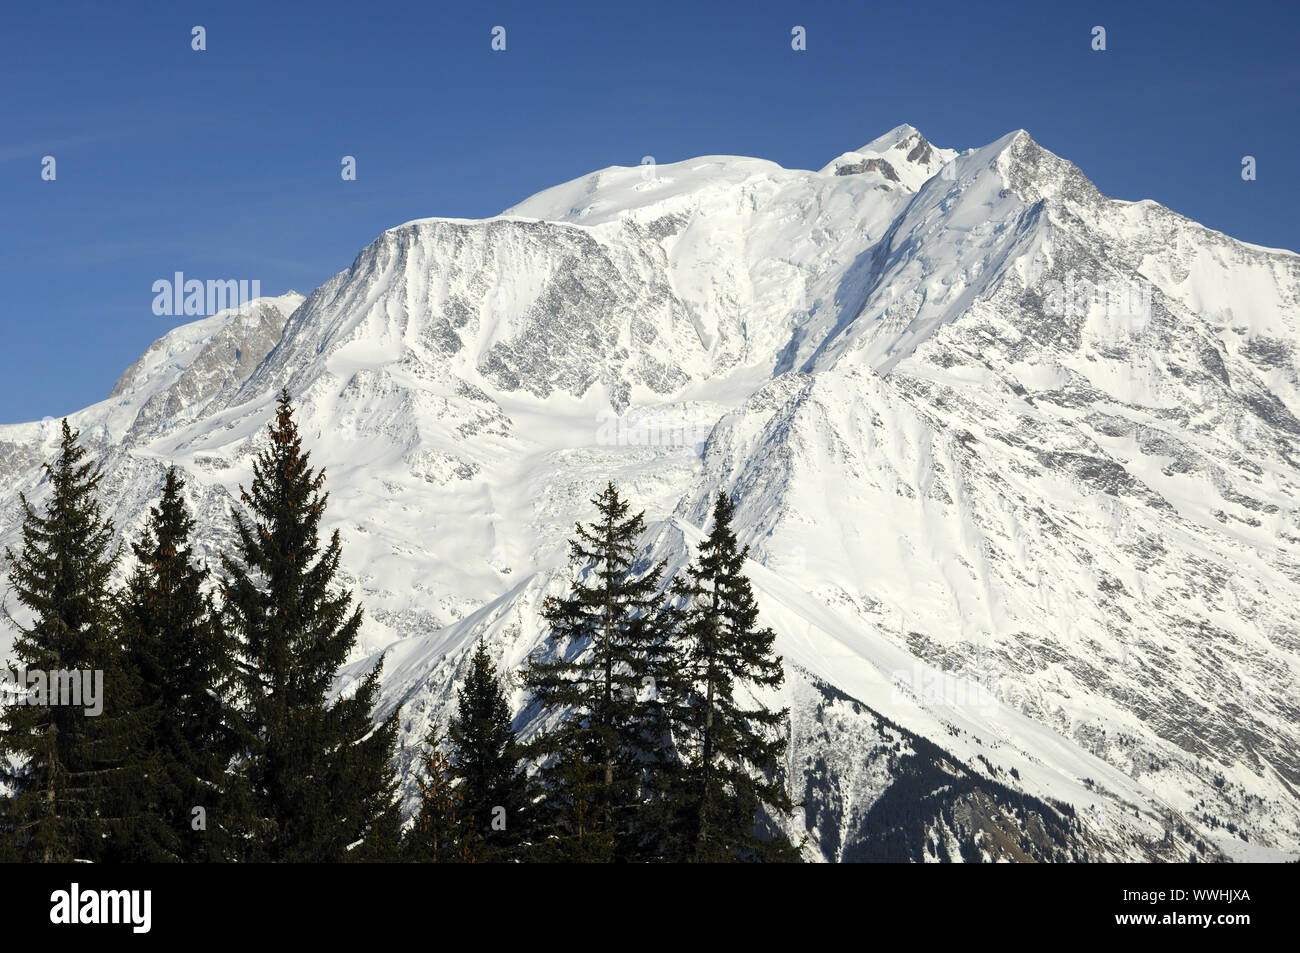 Massif of Mont Blanc, Alps, France Stock Photo